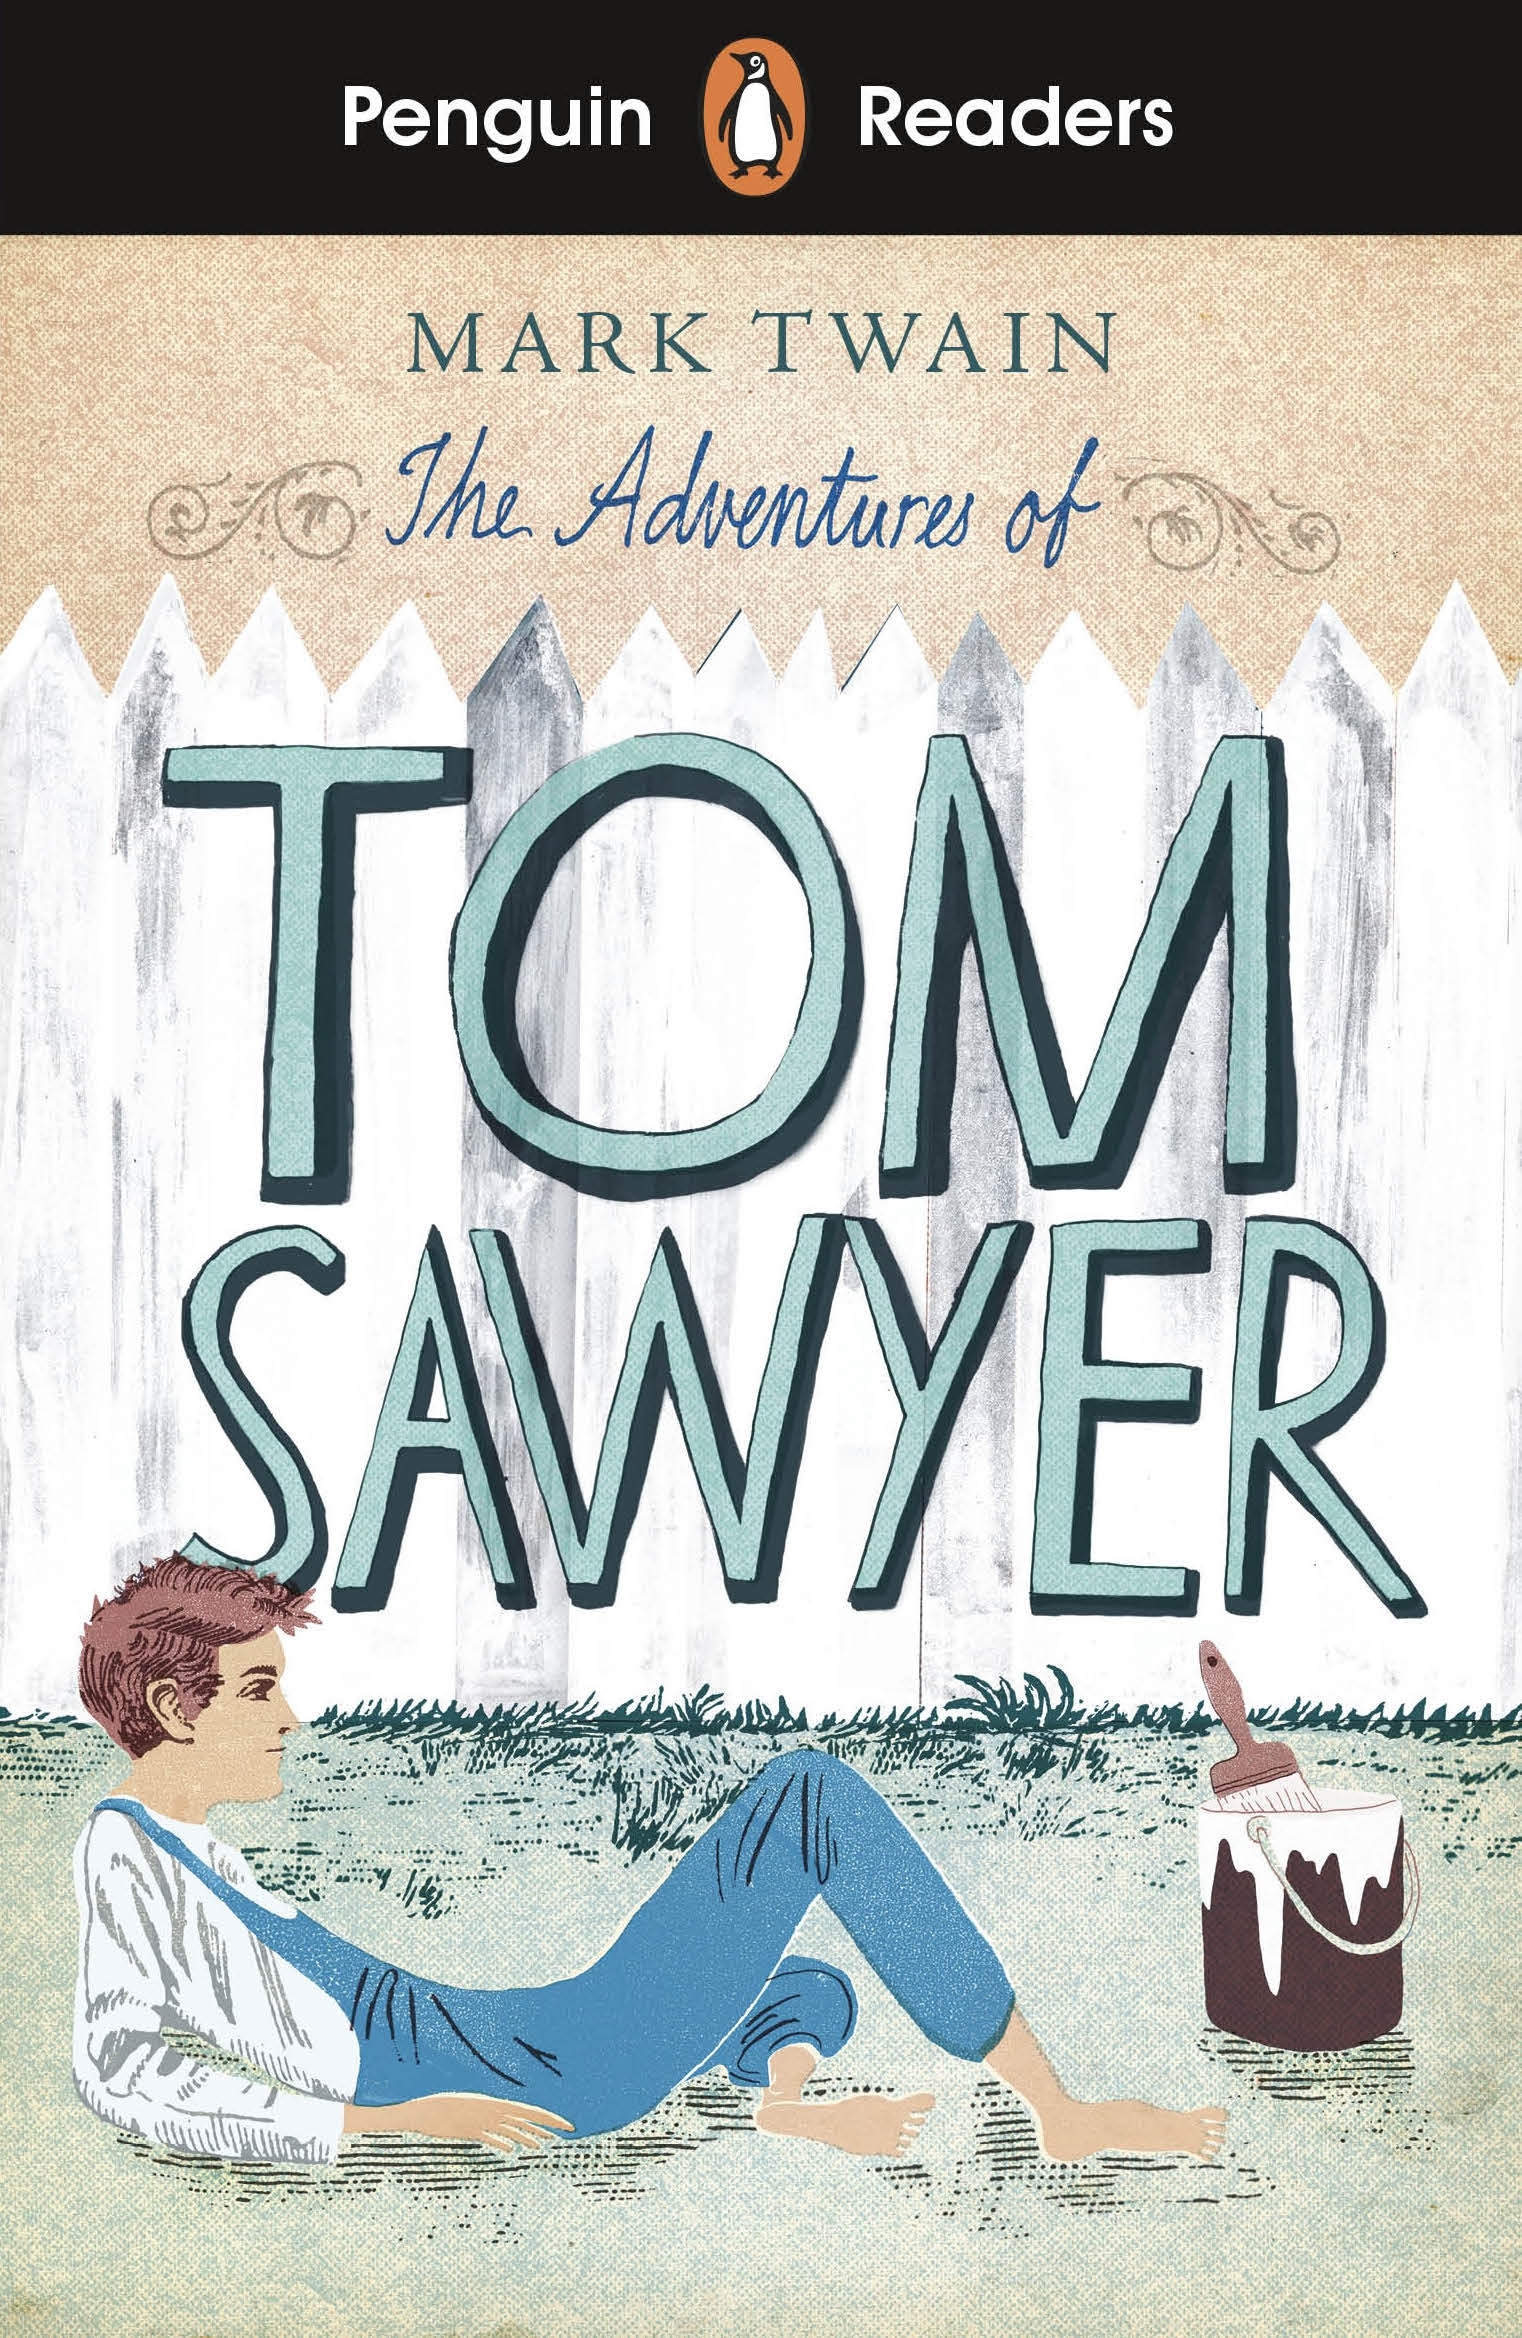 Book “Penguin Readers Level 2: The Adventures of Tom Sawyer (ELT Graded Reader)” by Mark Twain — May 14, 2020